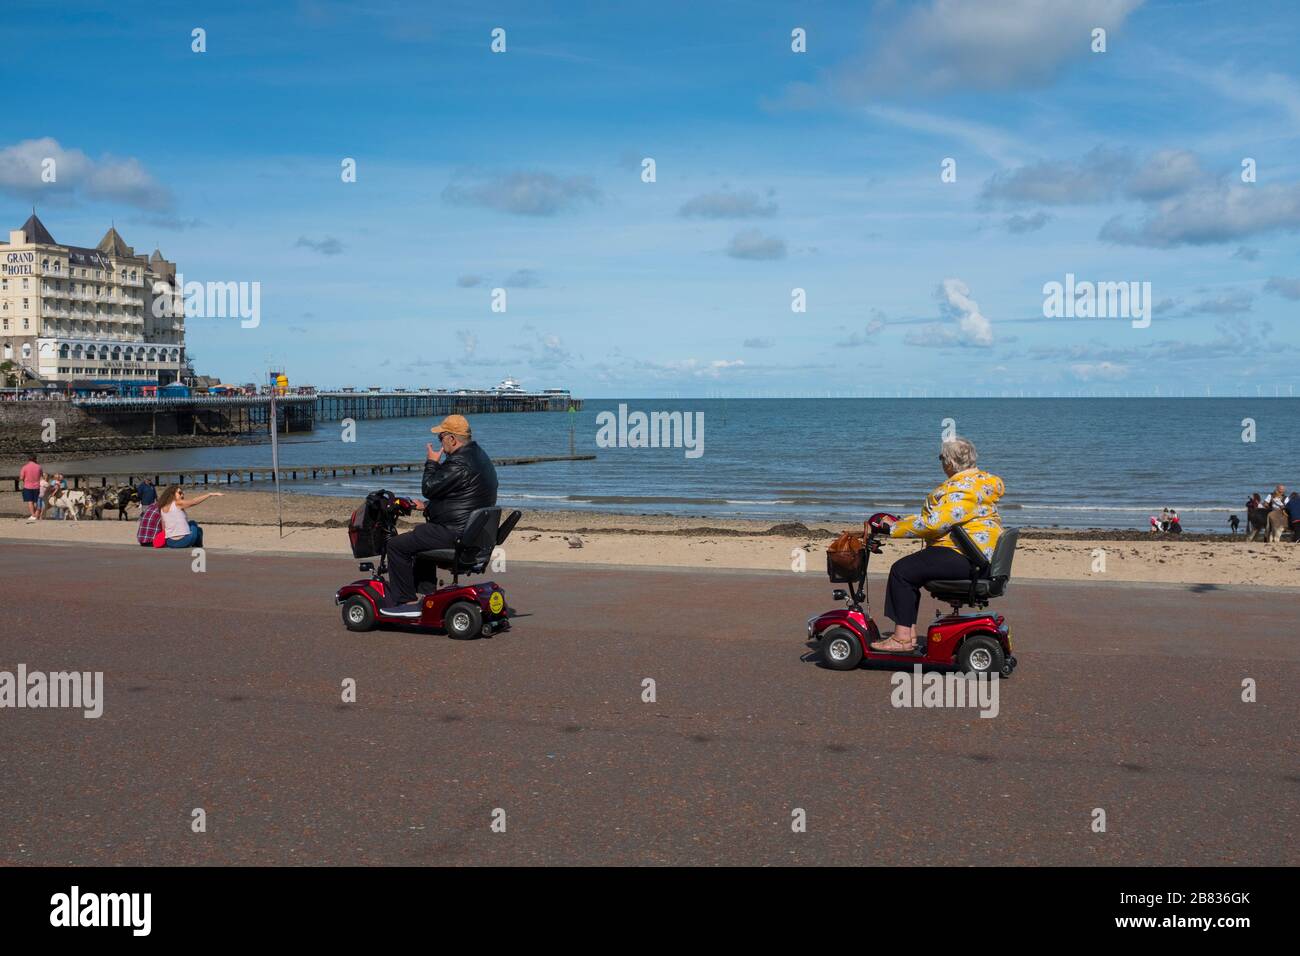 Man and woman on mobility scooters on the promenade at Llandudno, Wales, UK Stock Photo